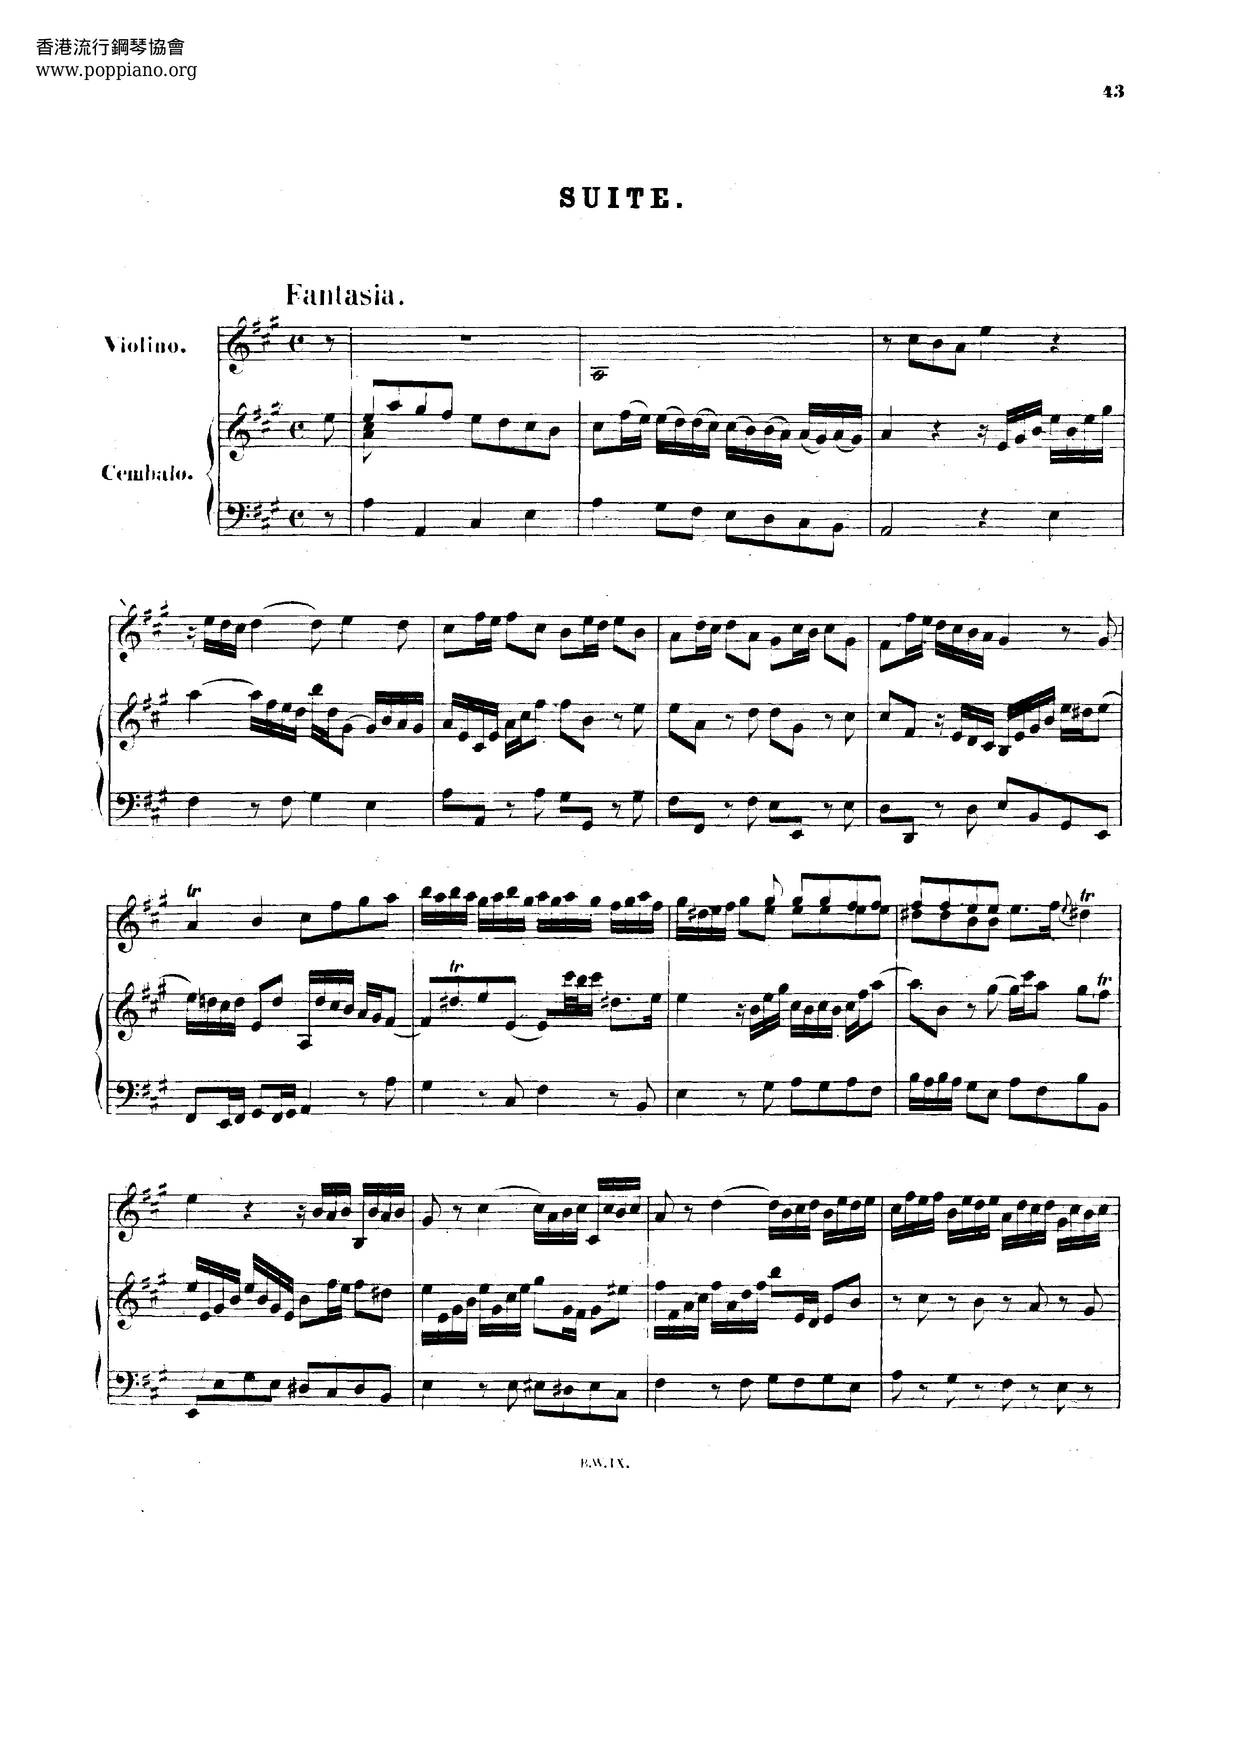 Suite In A Major, BWV 1025ピアノ譜